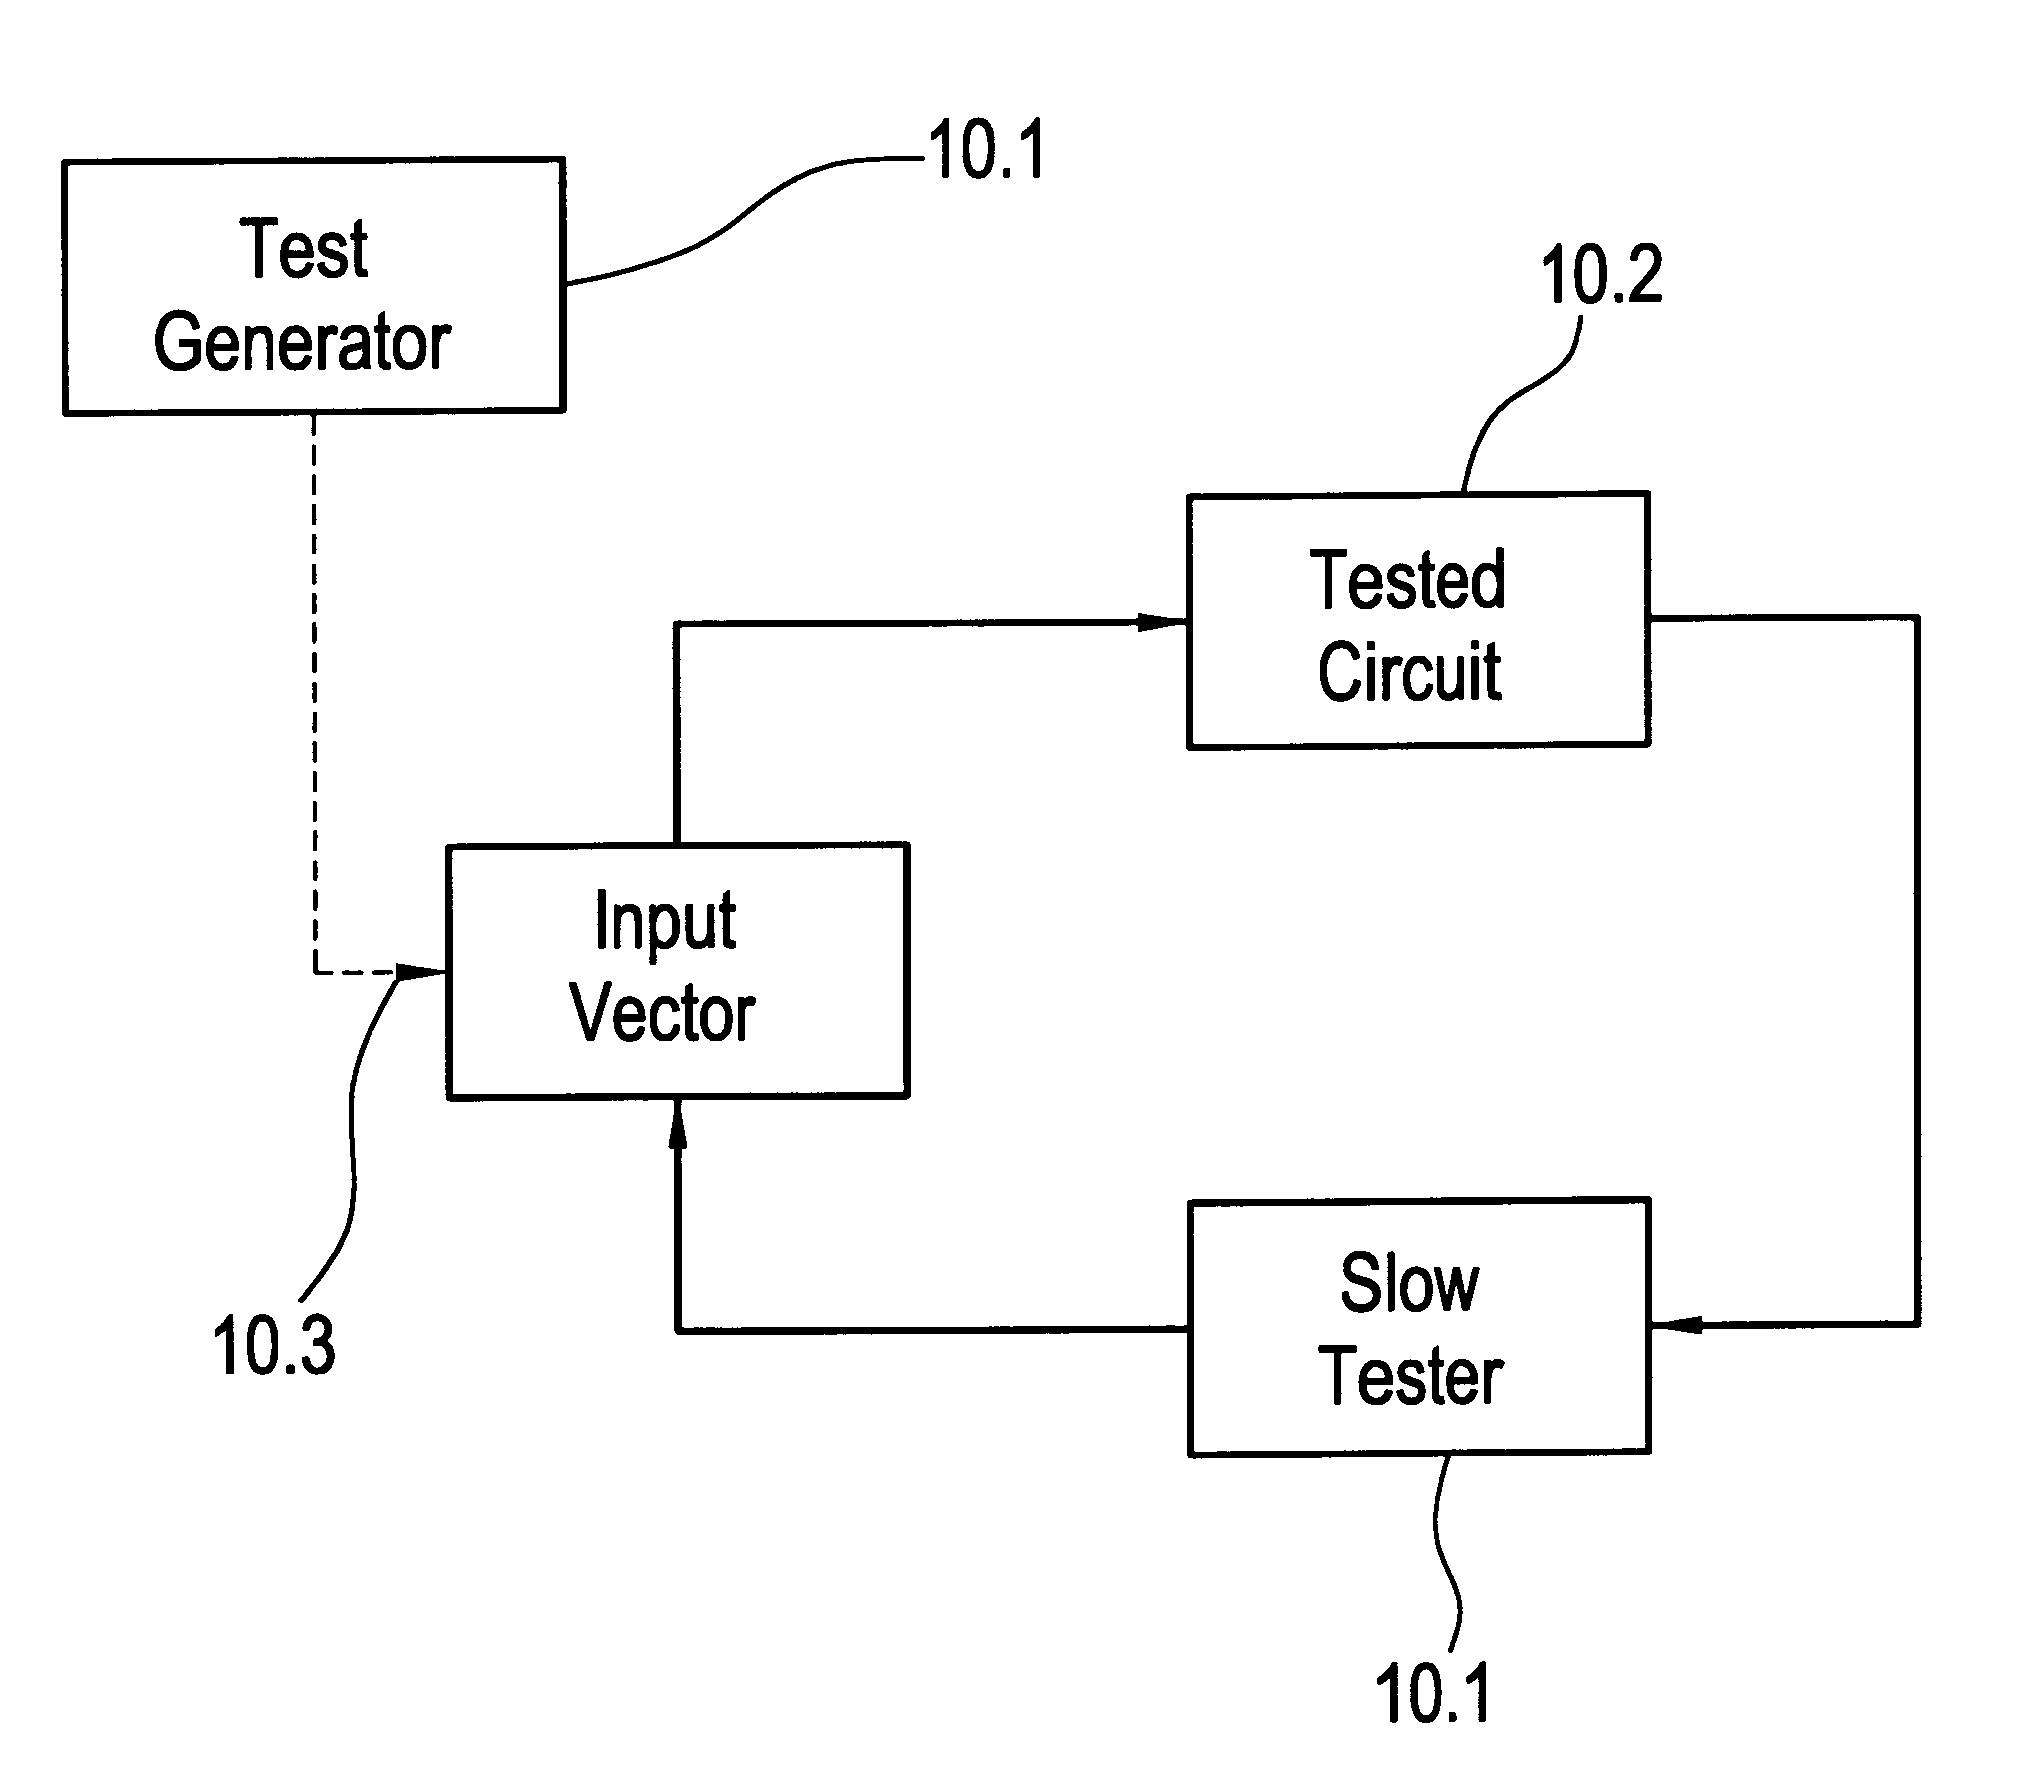 System and method for testing high speed VLSI devices using slower testers